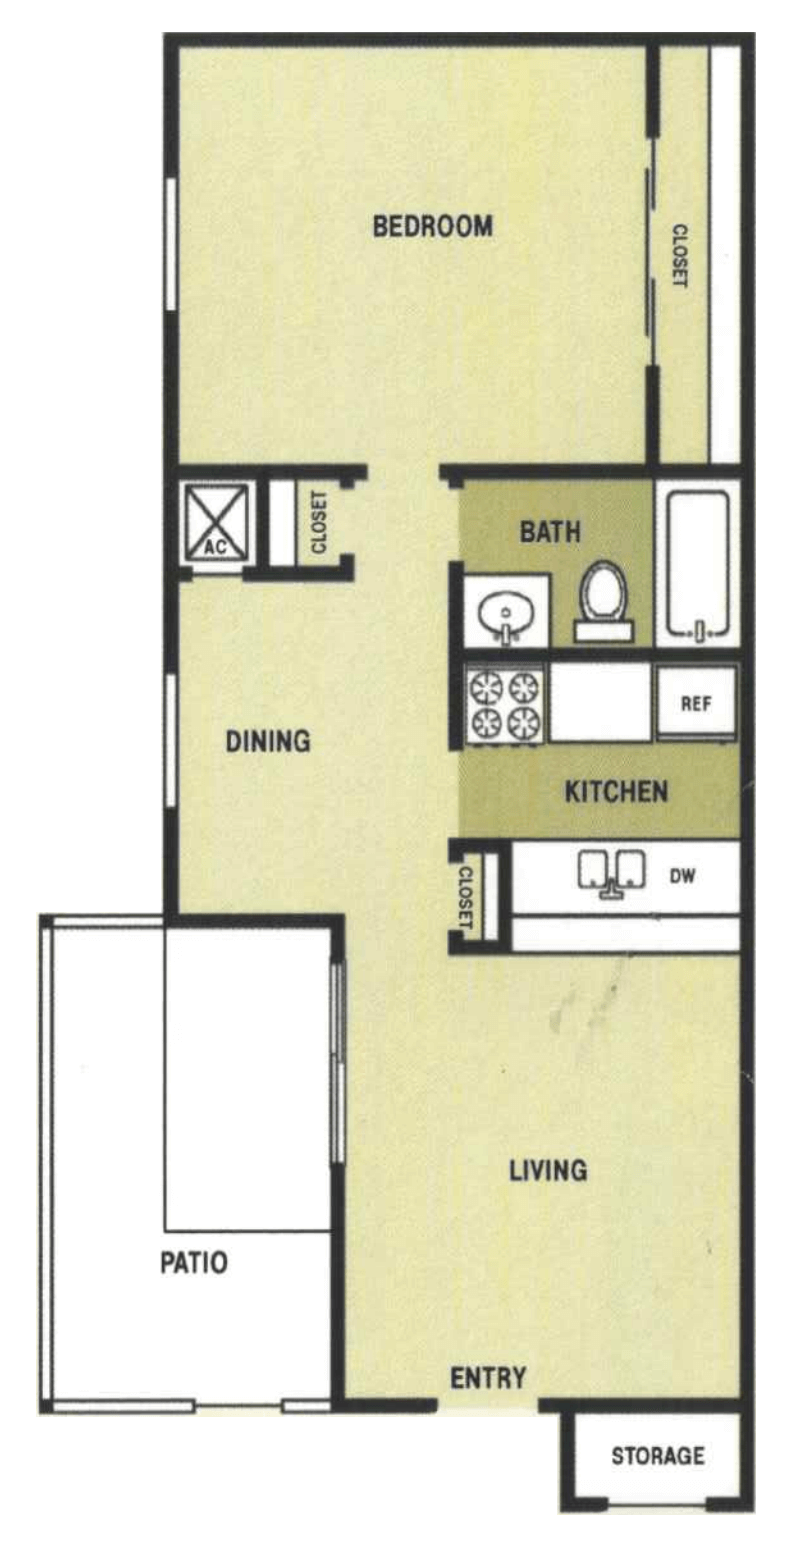 A 1×1 B unit with 1 Bedrooms and 1 Bathrooms with area of 650 sq. ft